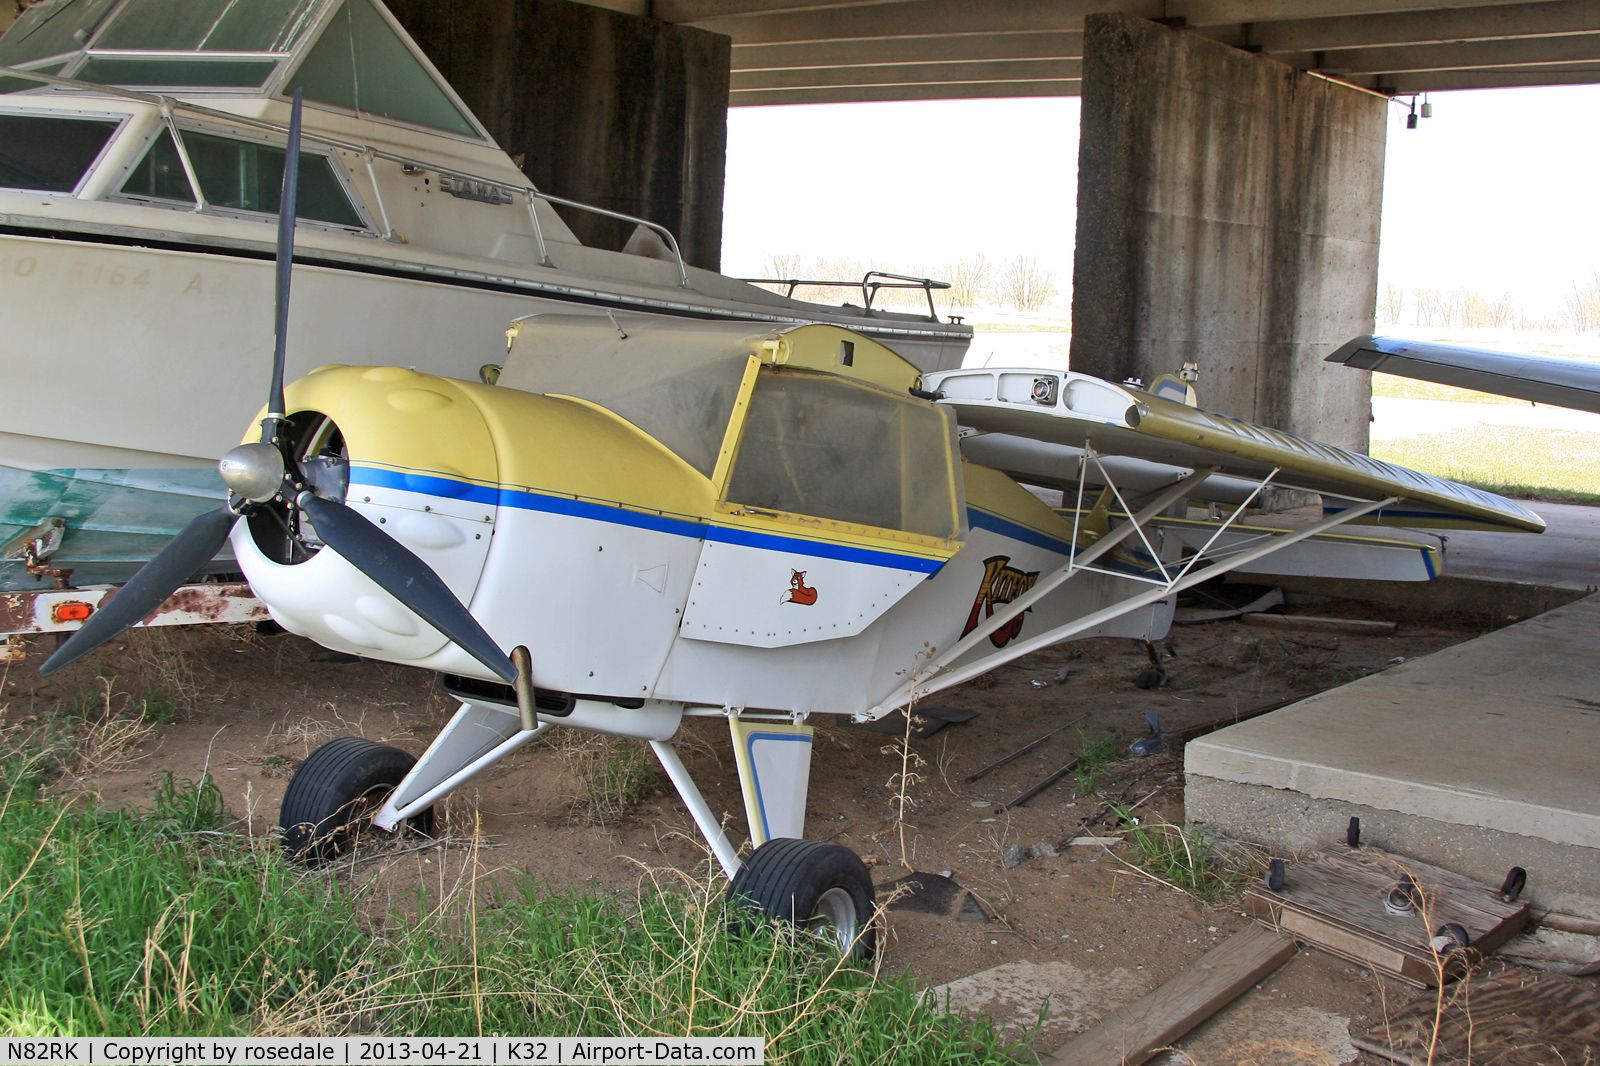 N82RK, 1990 Denney Kitfox Model 1 C/N 144, At her home airfield of Riverside, Wichita, KS before the airport was closed for development